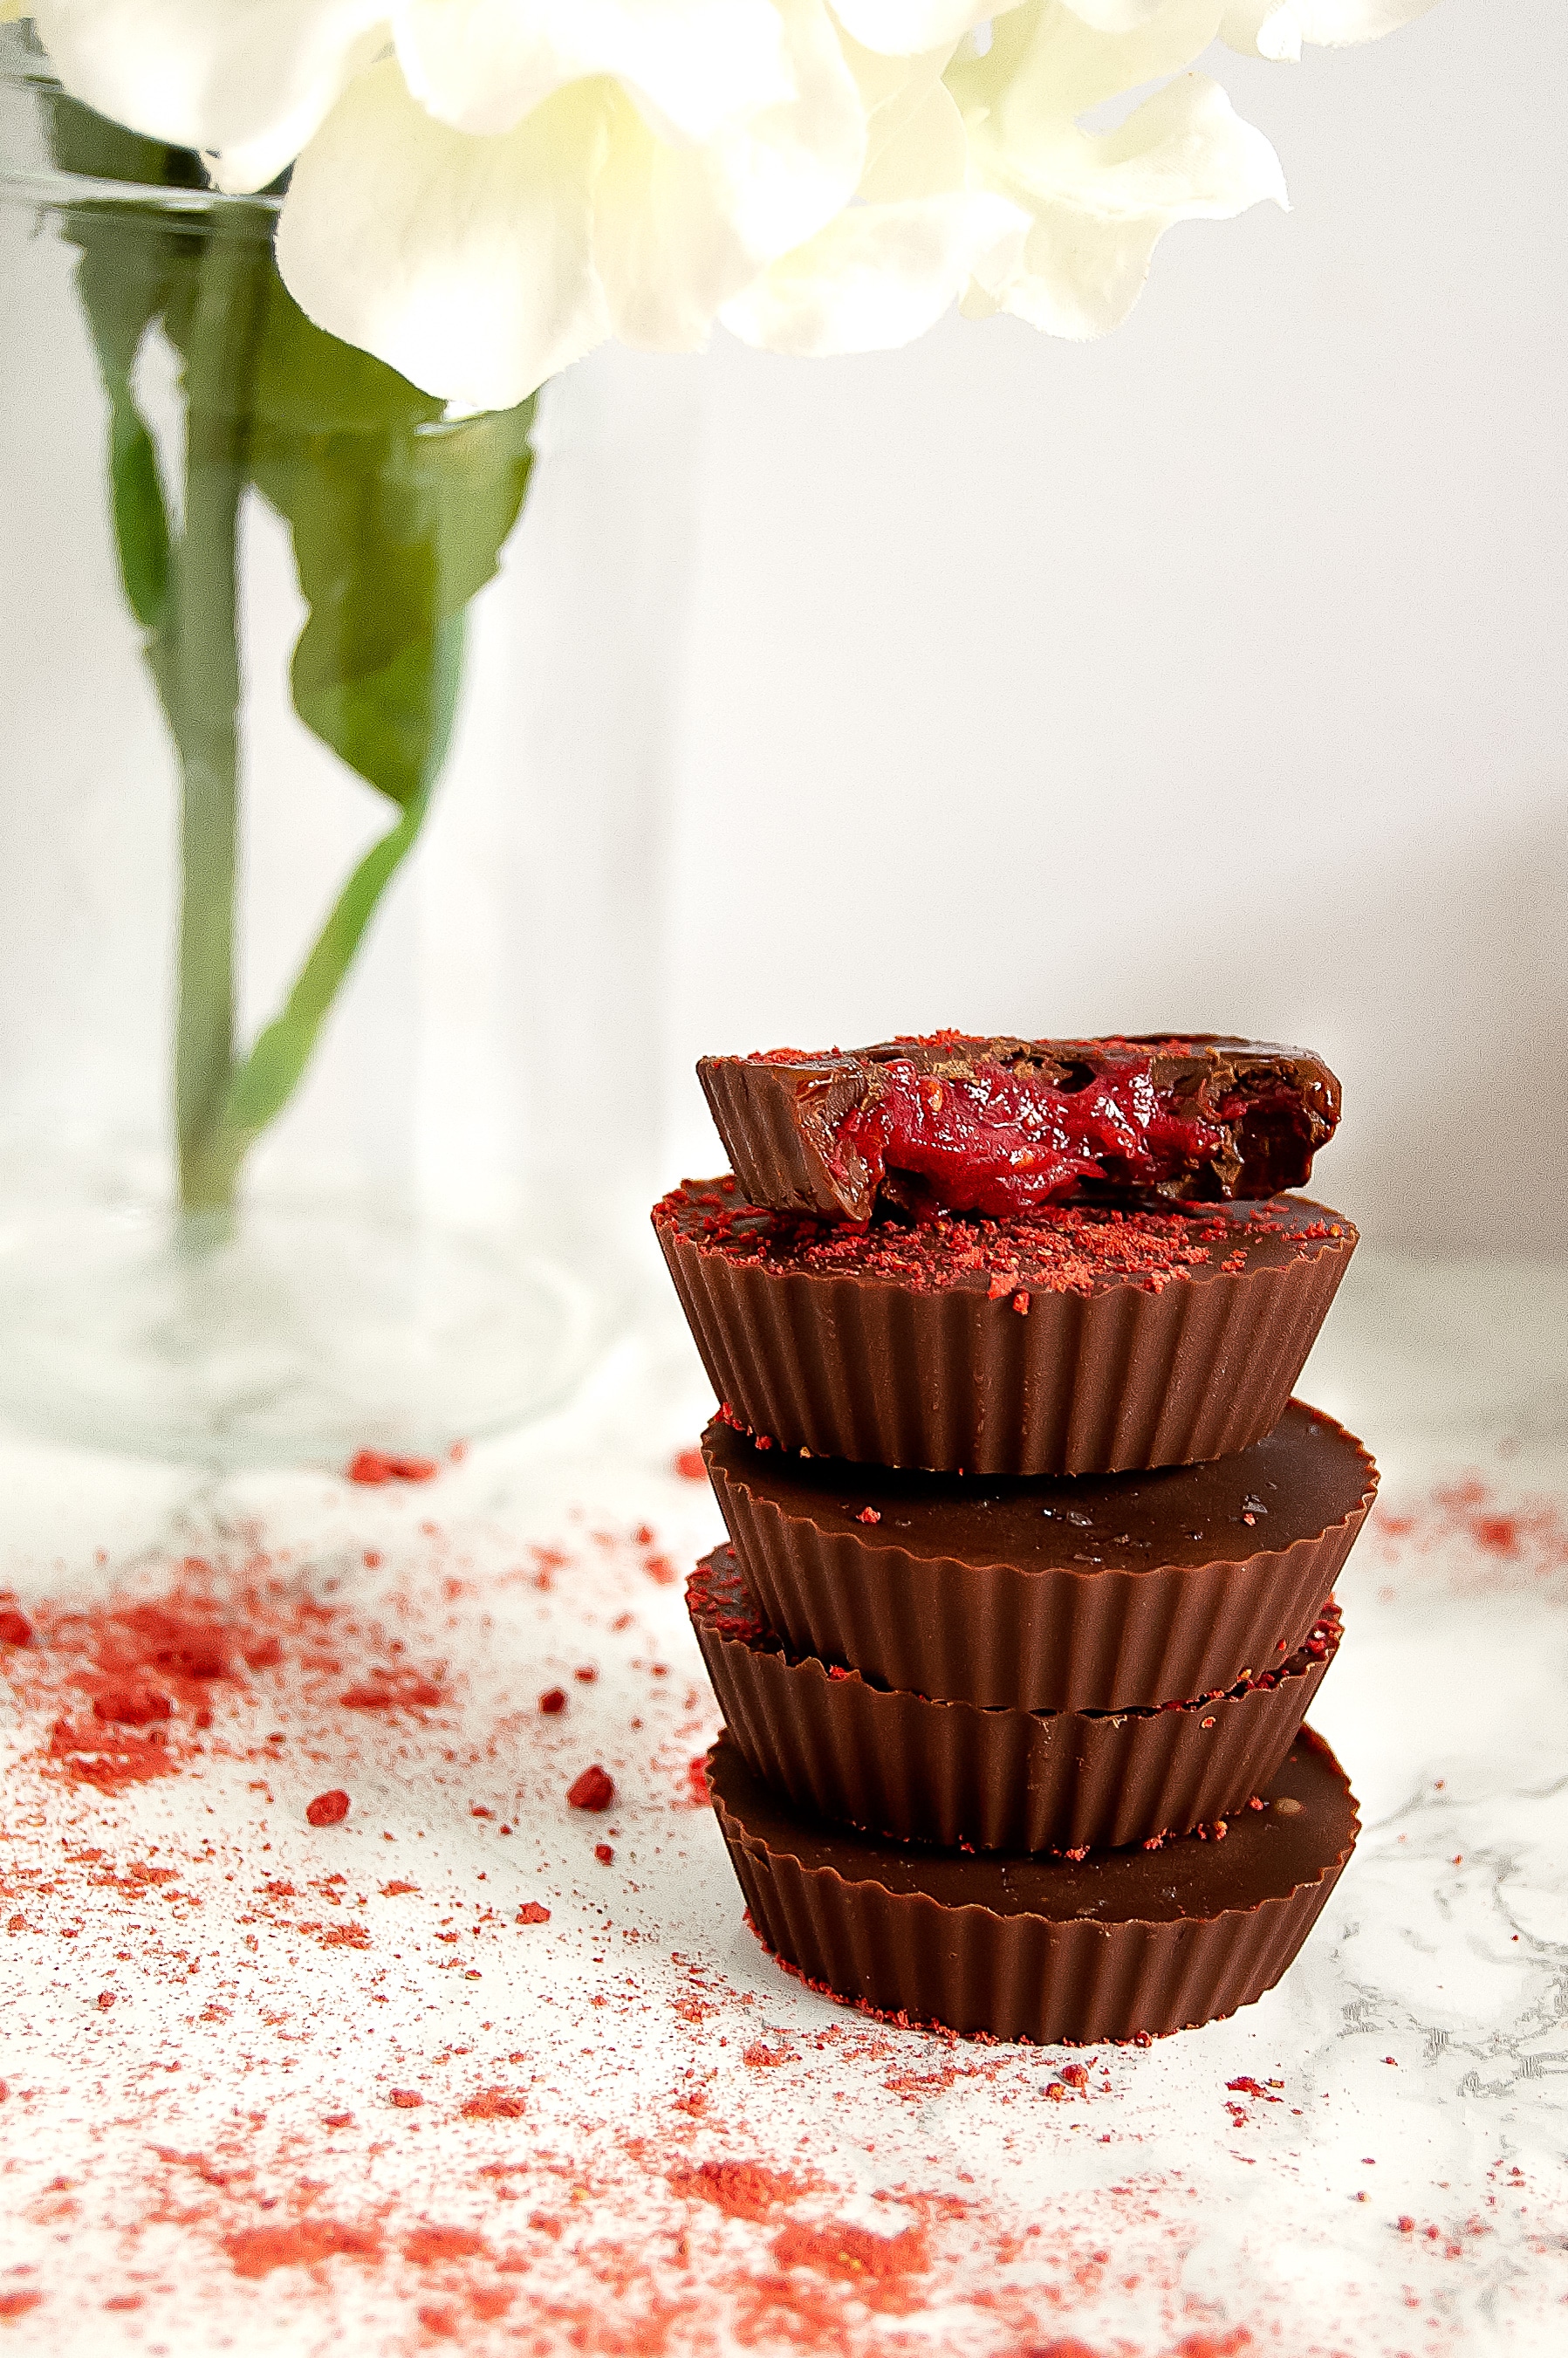 Raspberry Caramel Chocolate Cups Nutrition To Fit,Starbuck Sizes